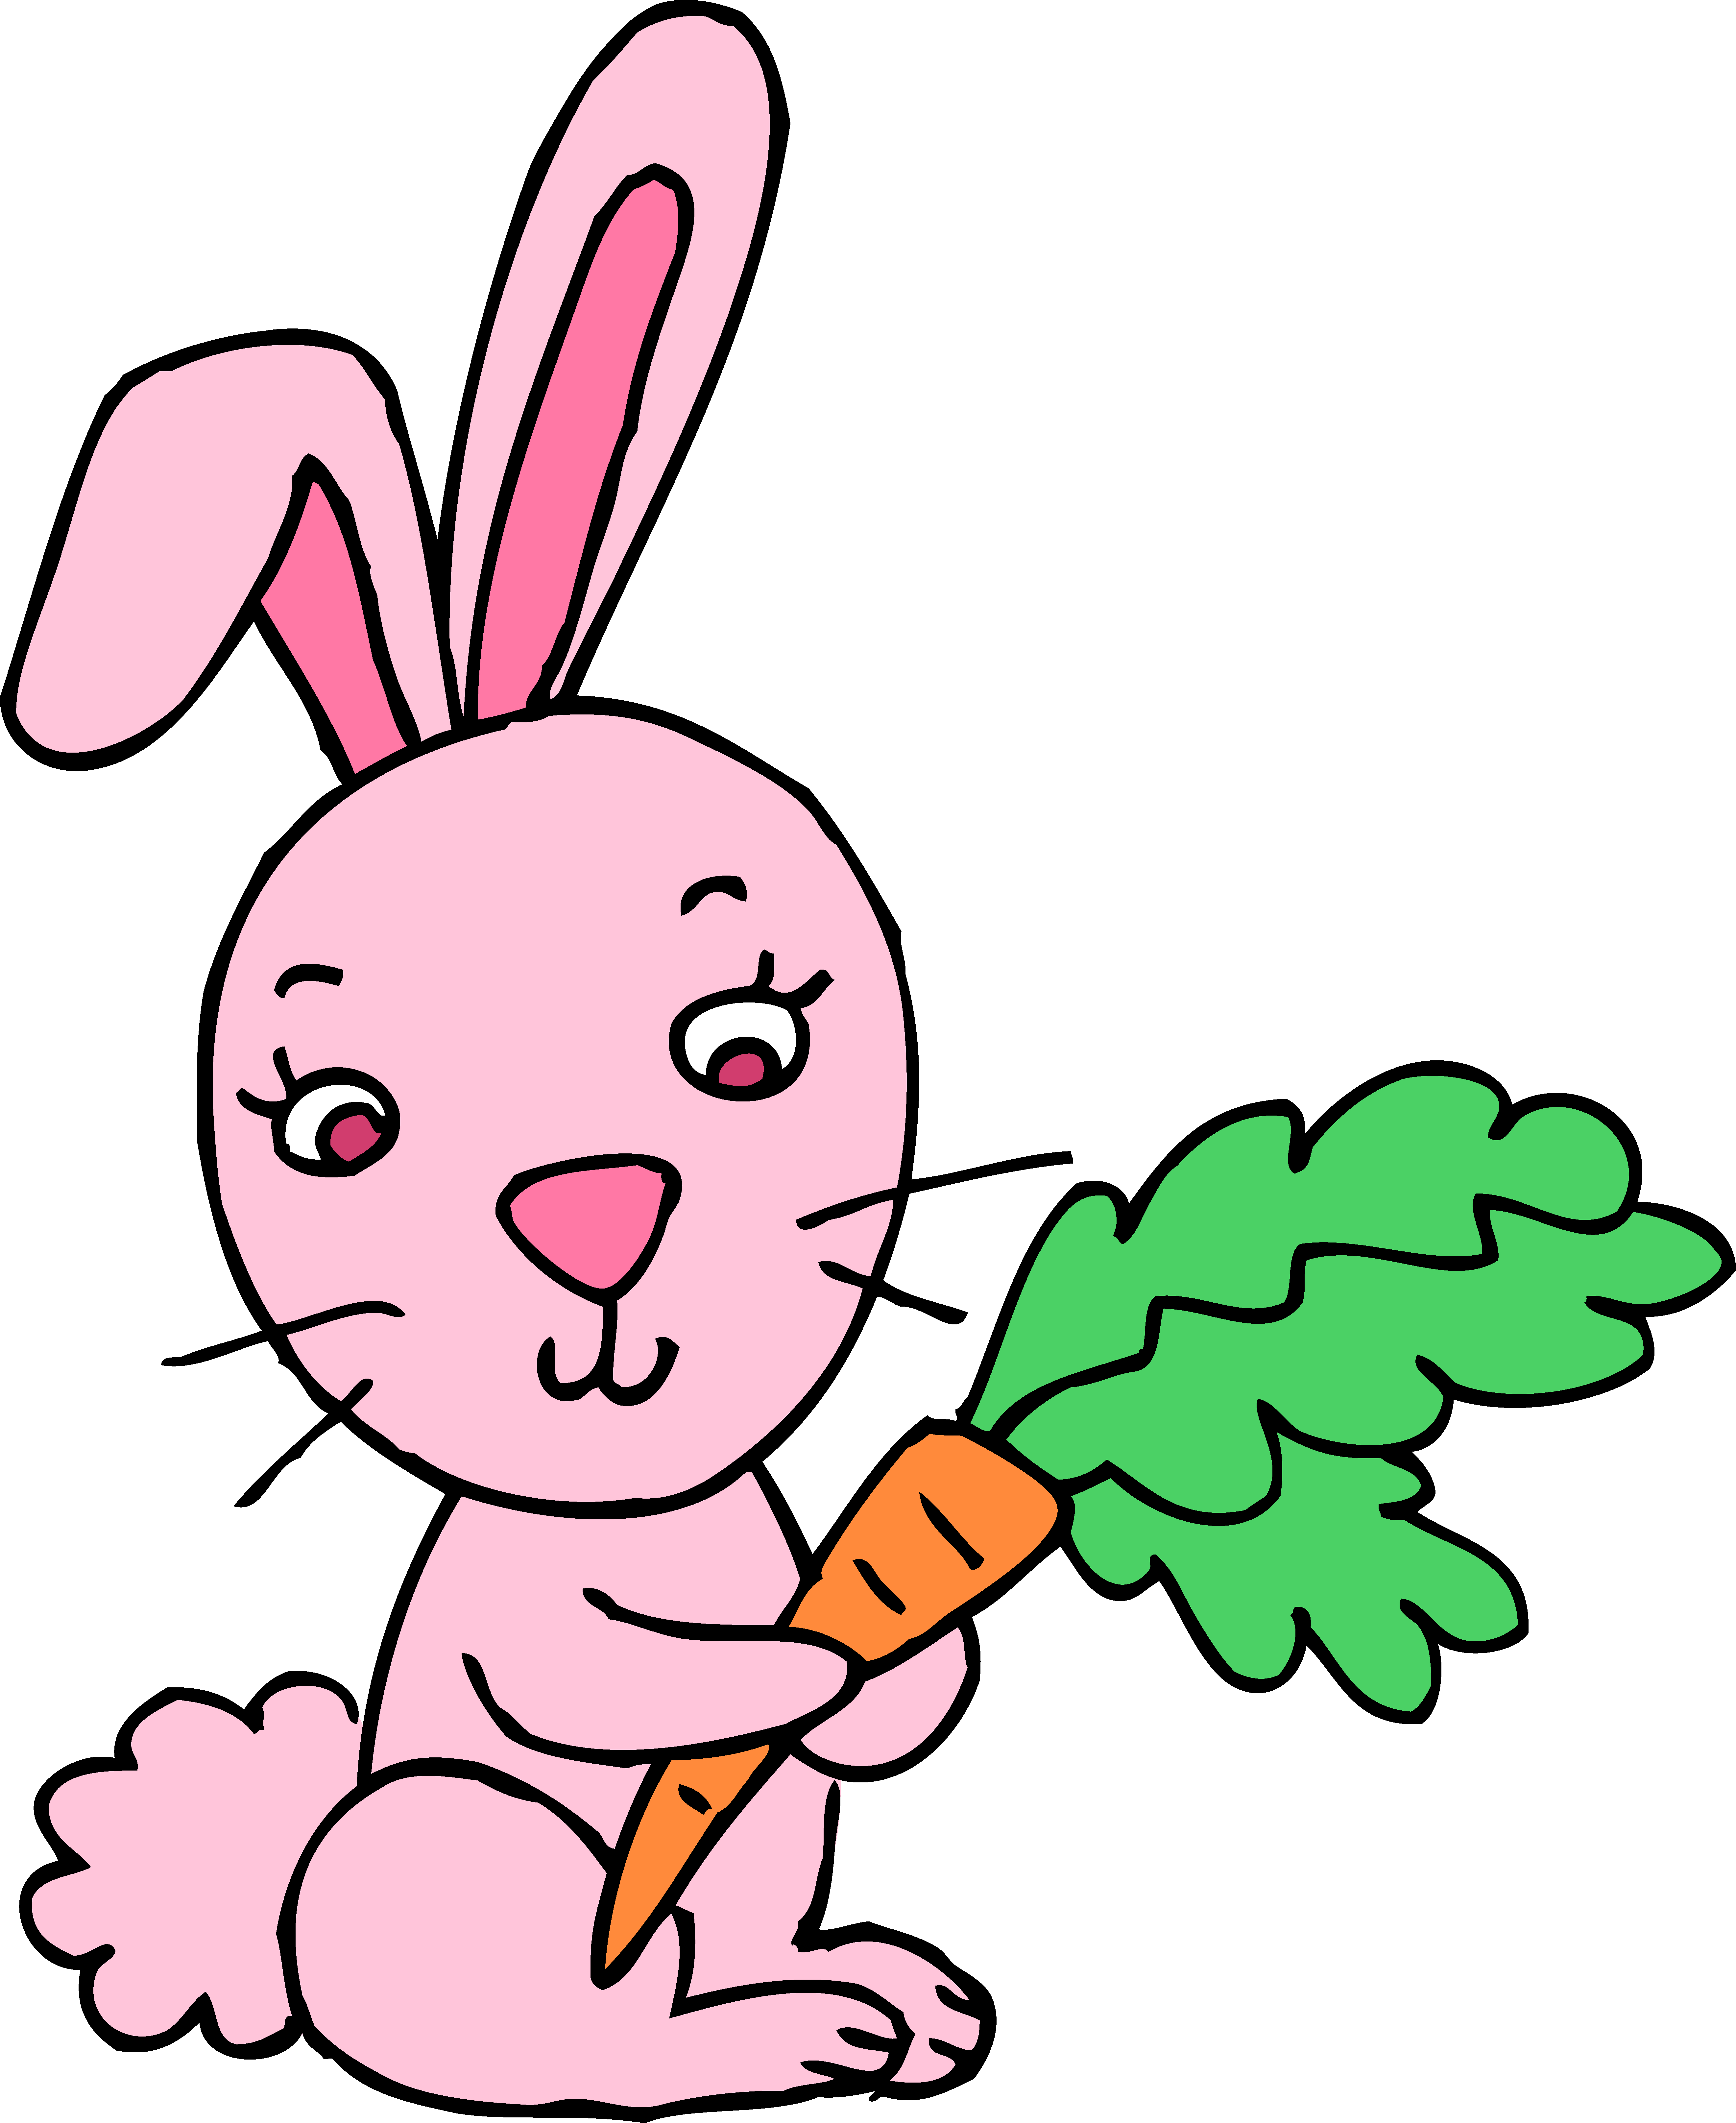 Pink Bunny Rabbit With Carrot - Free Clip Art